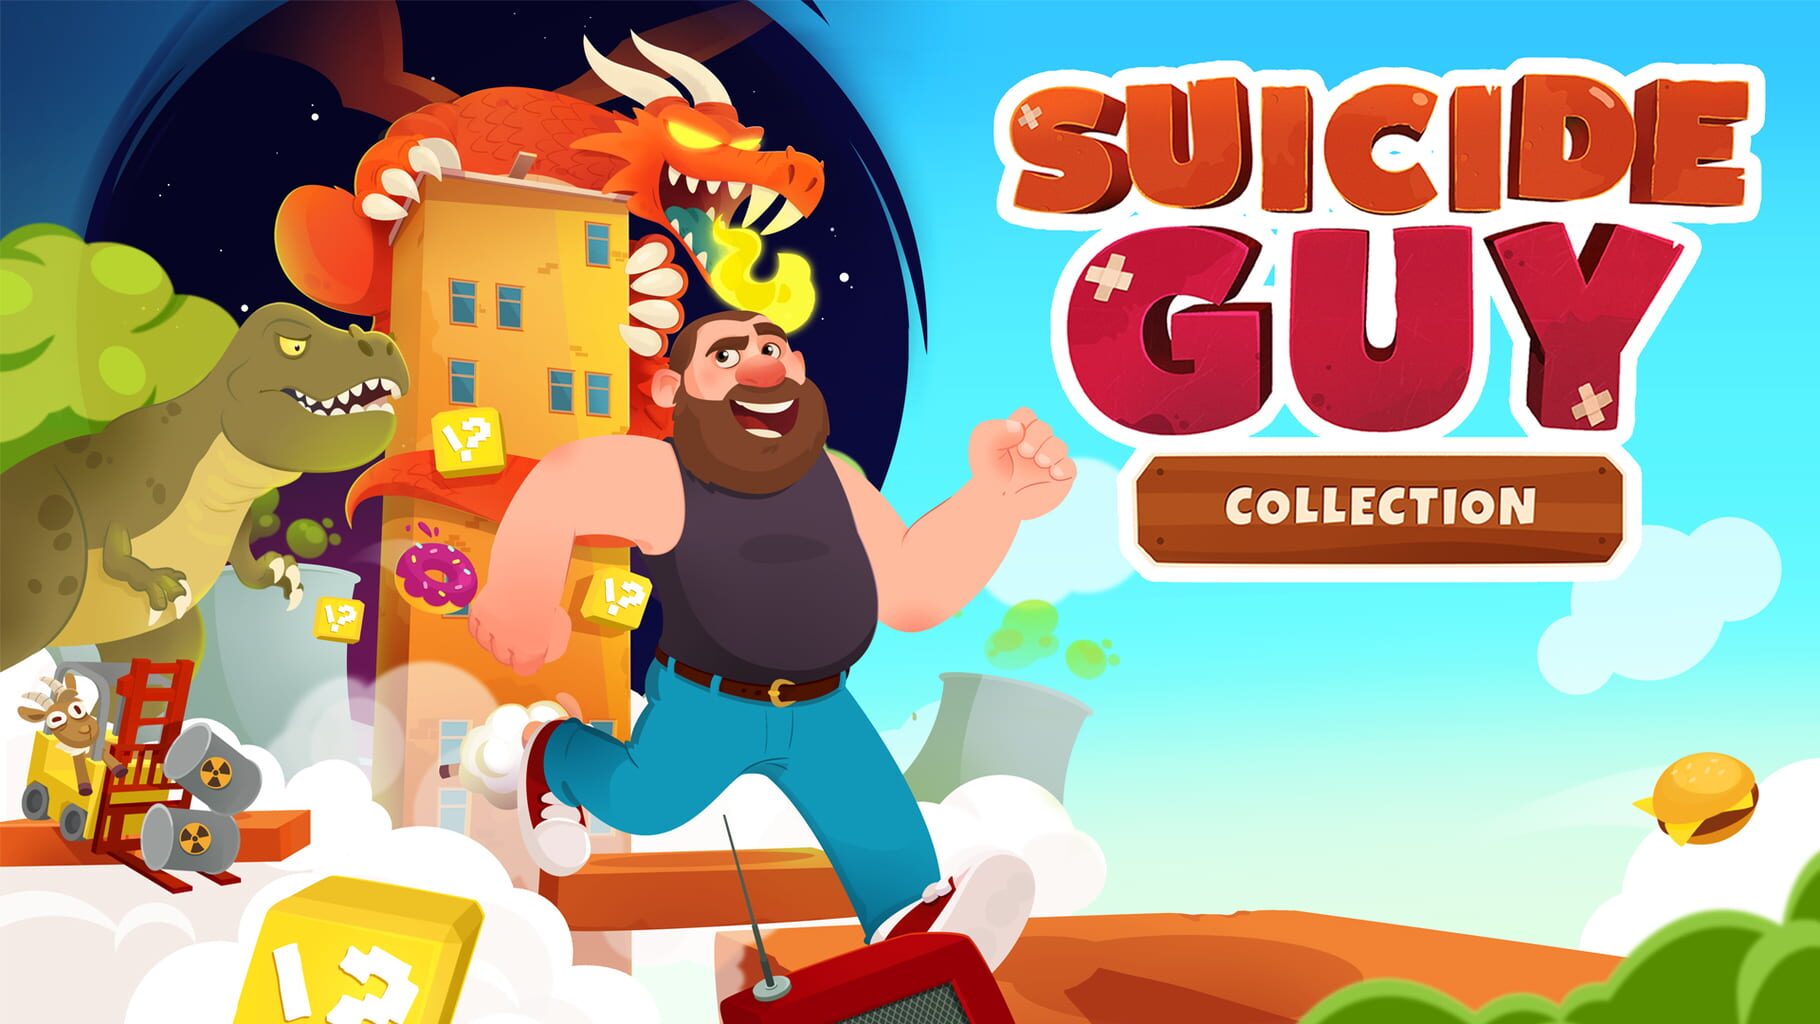 Suicide Guy Collection artwork